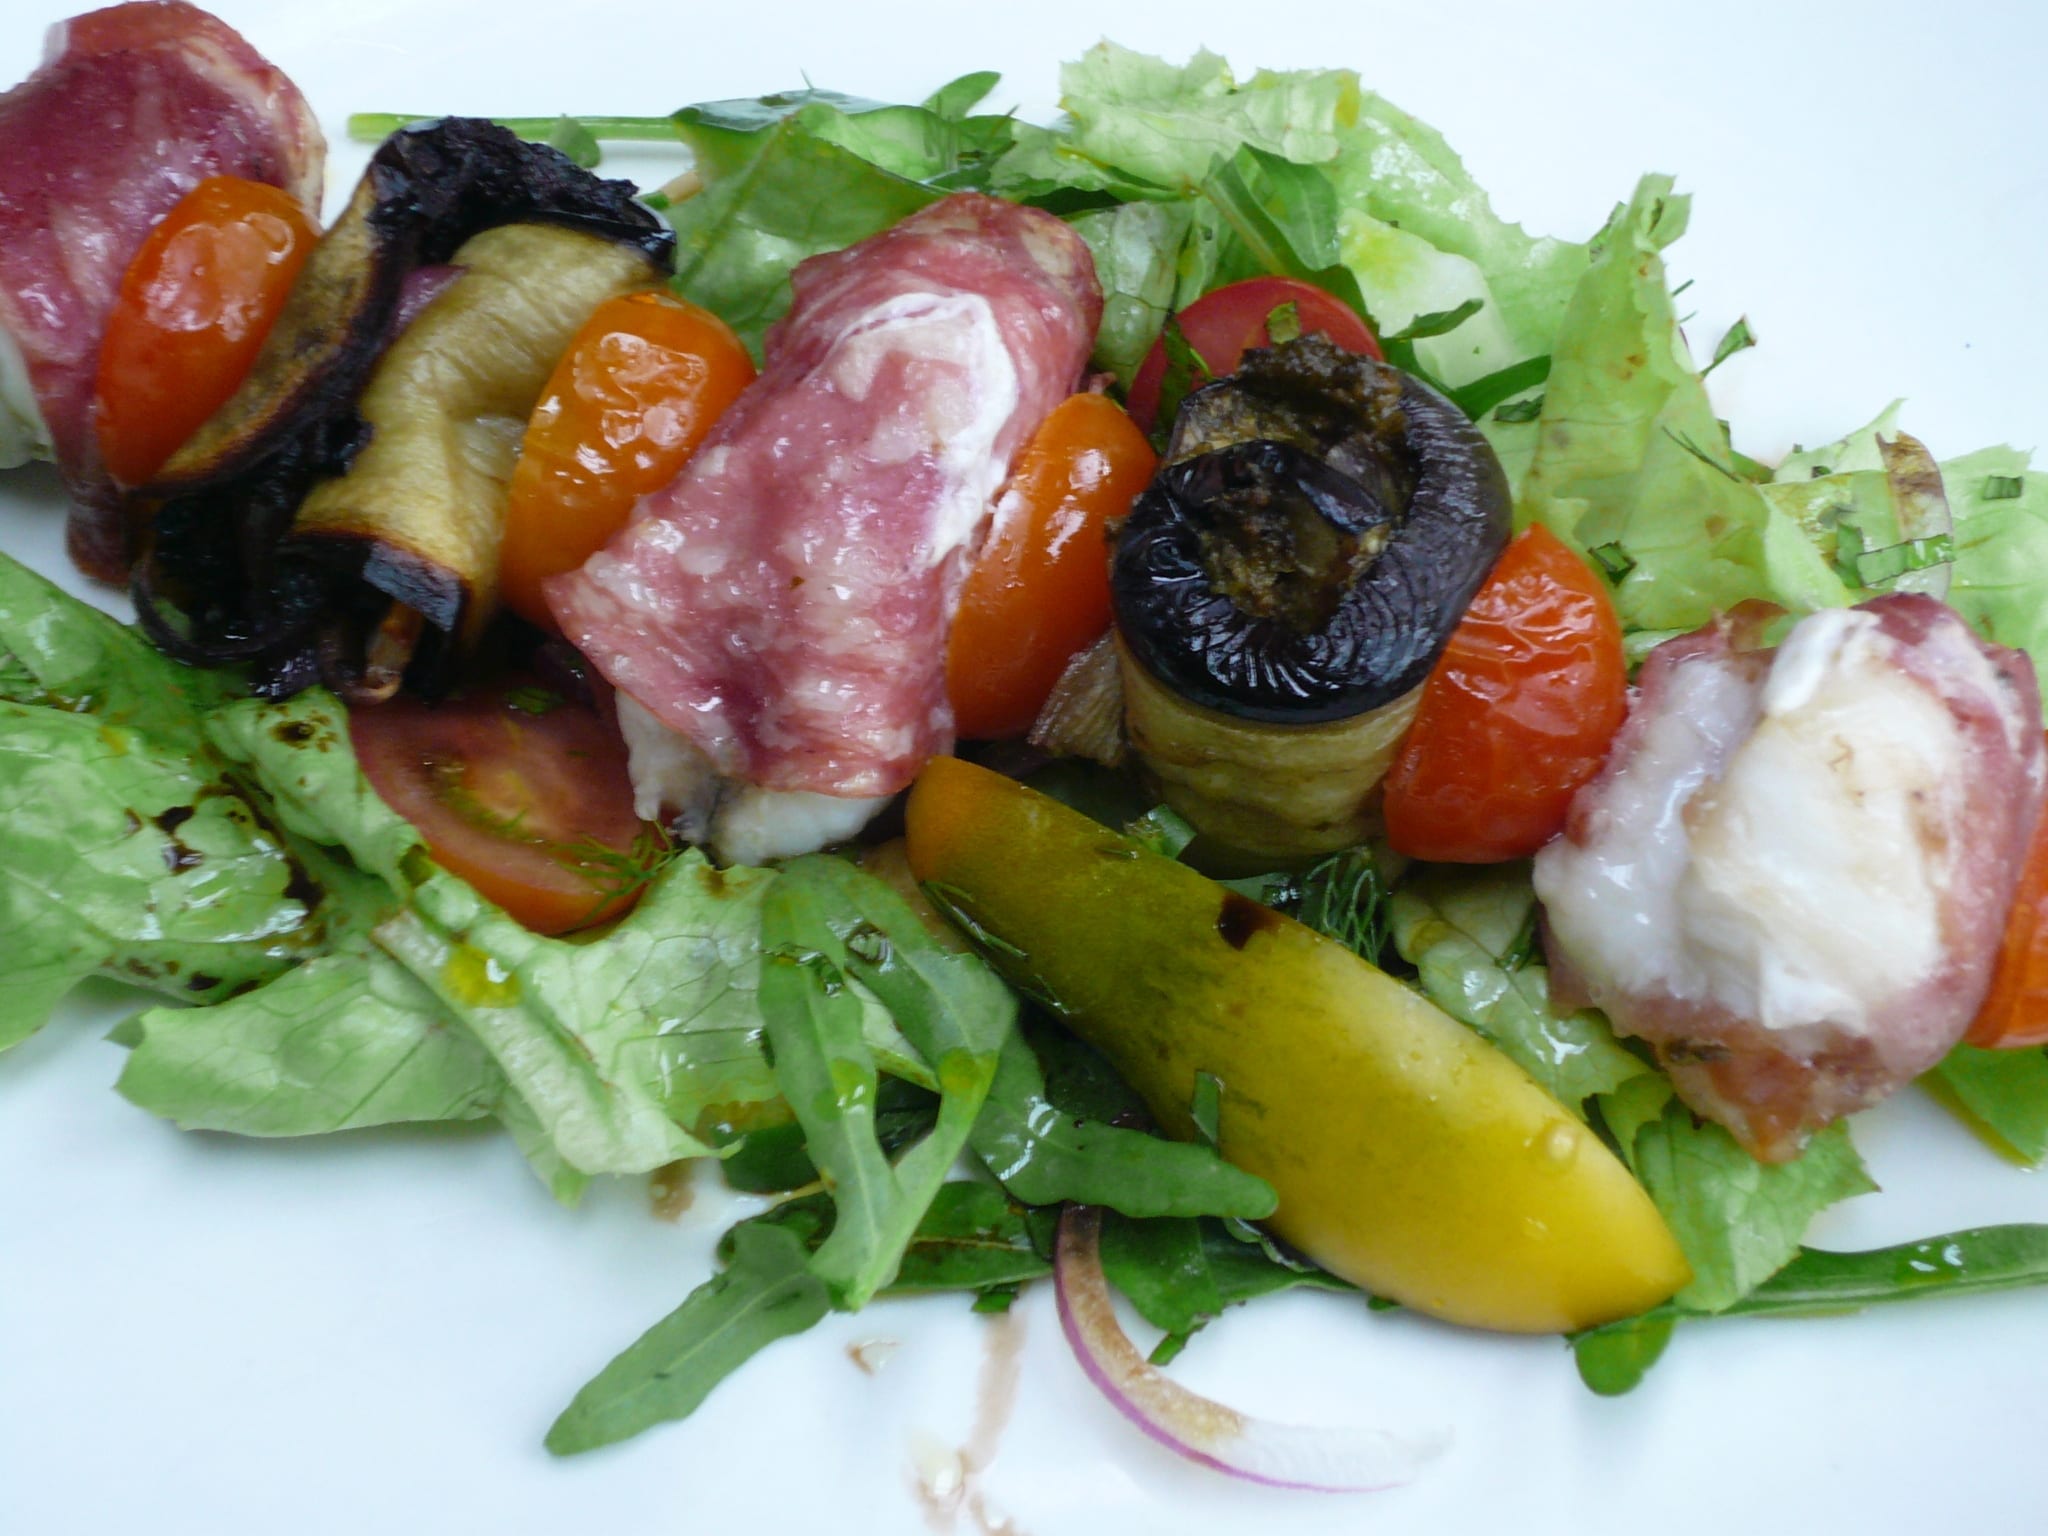 Skewers of monkfish pieces wrapped in parma ham & cooked with grilled aubergine & cherry tomatoes.